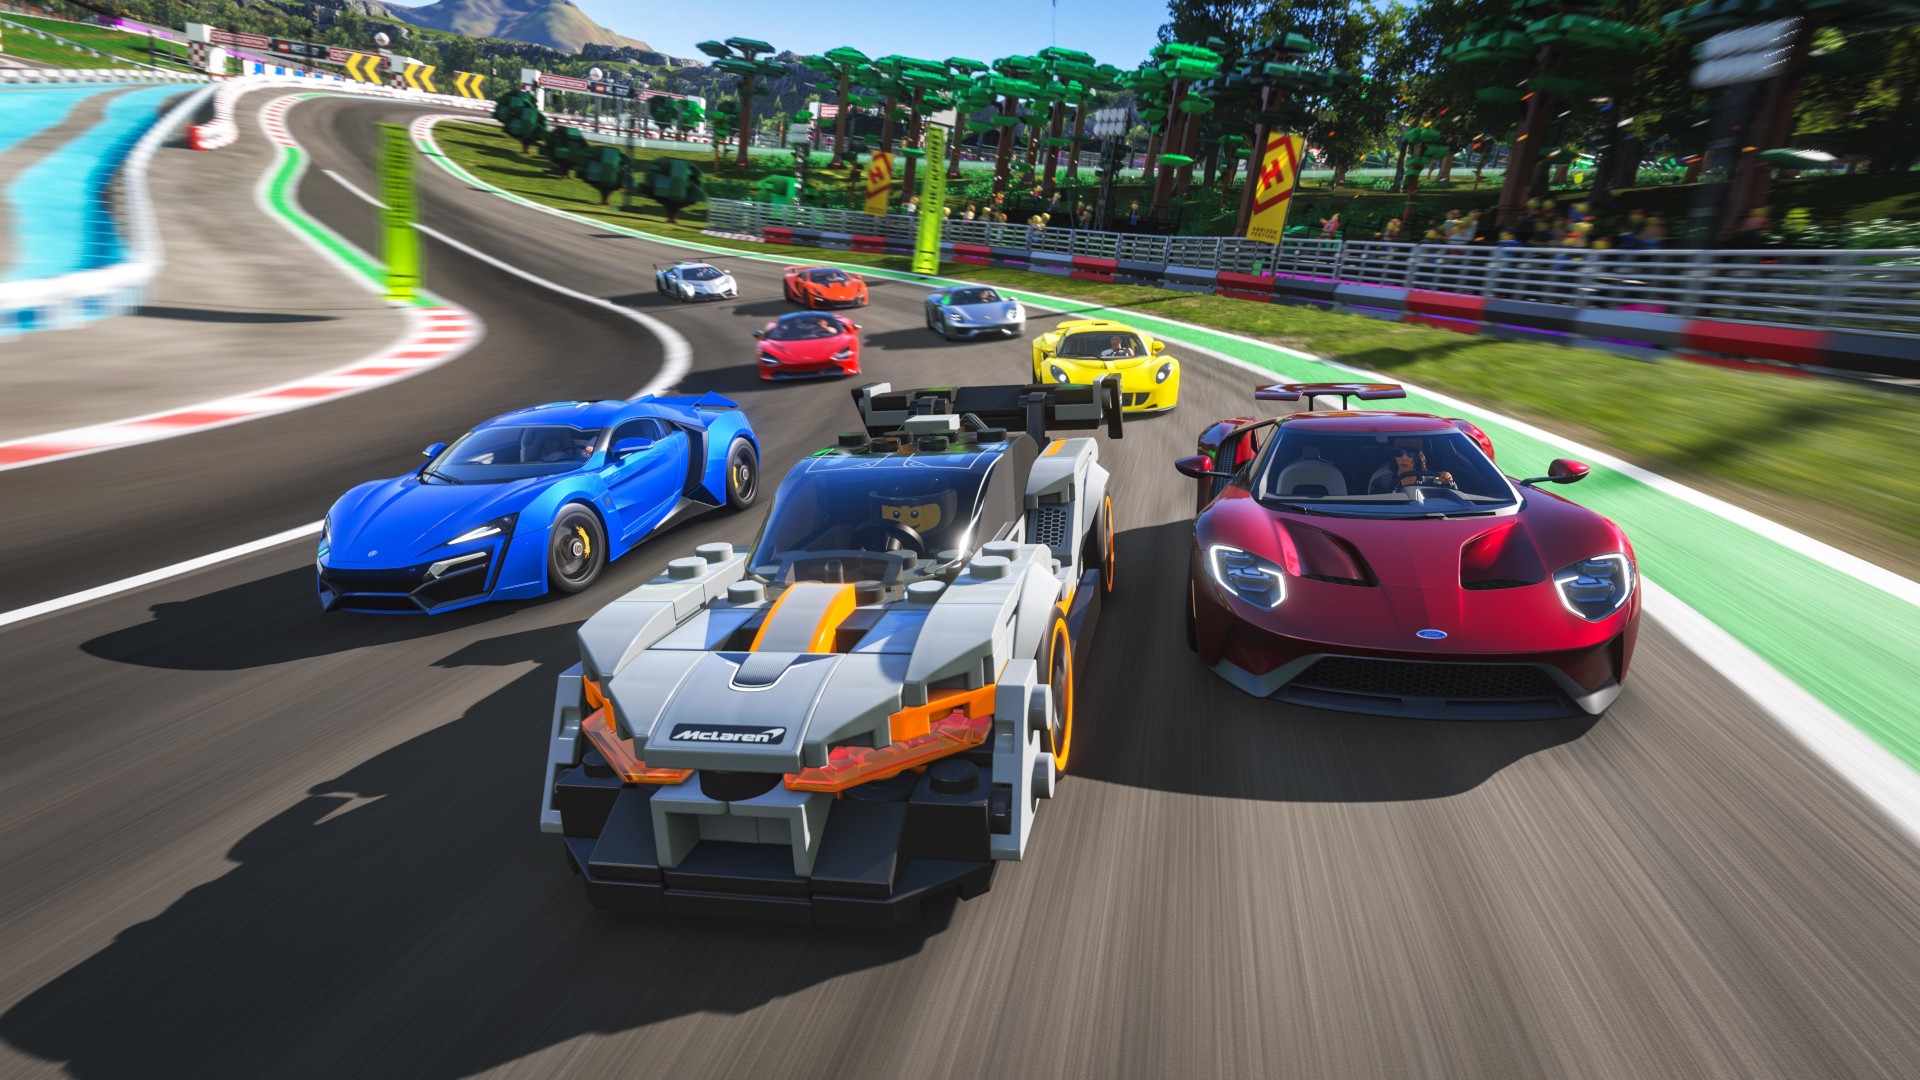 New OpenWorld LEGO Racing Game Currently in Development at 2K Rumor